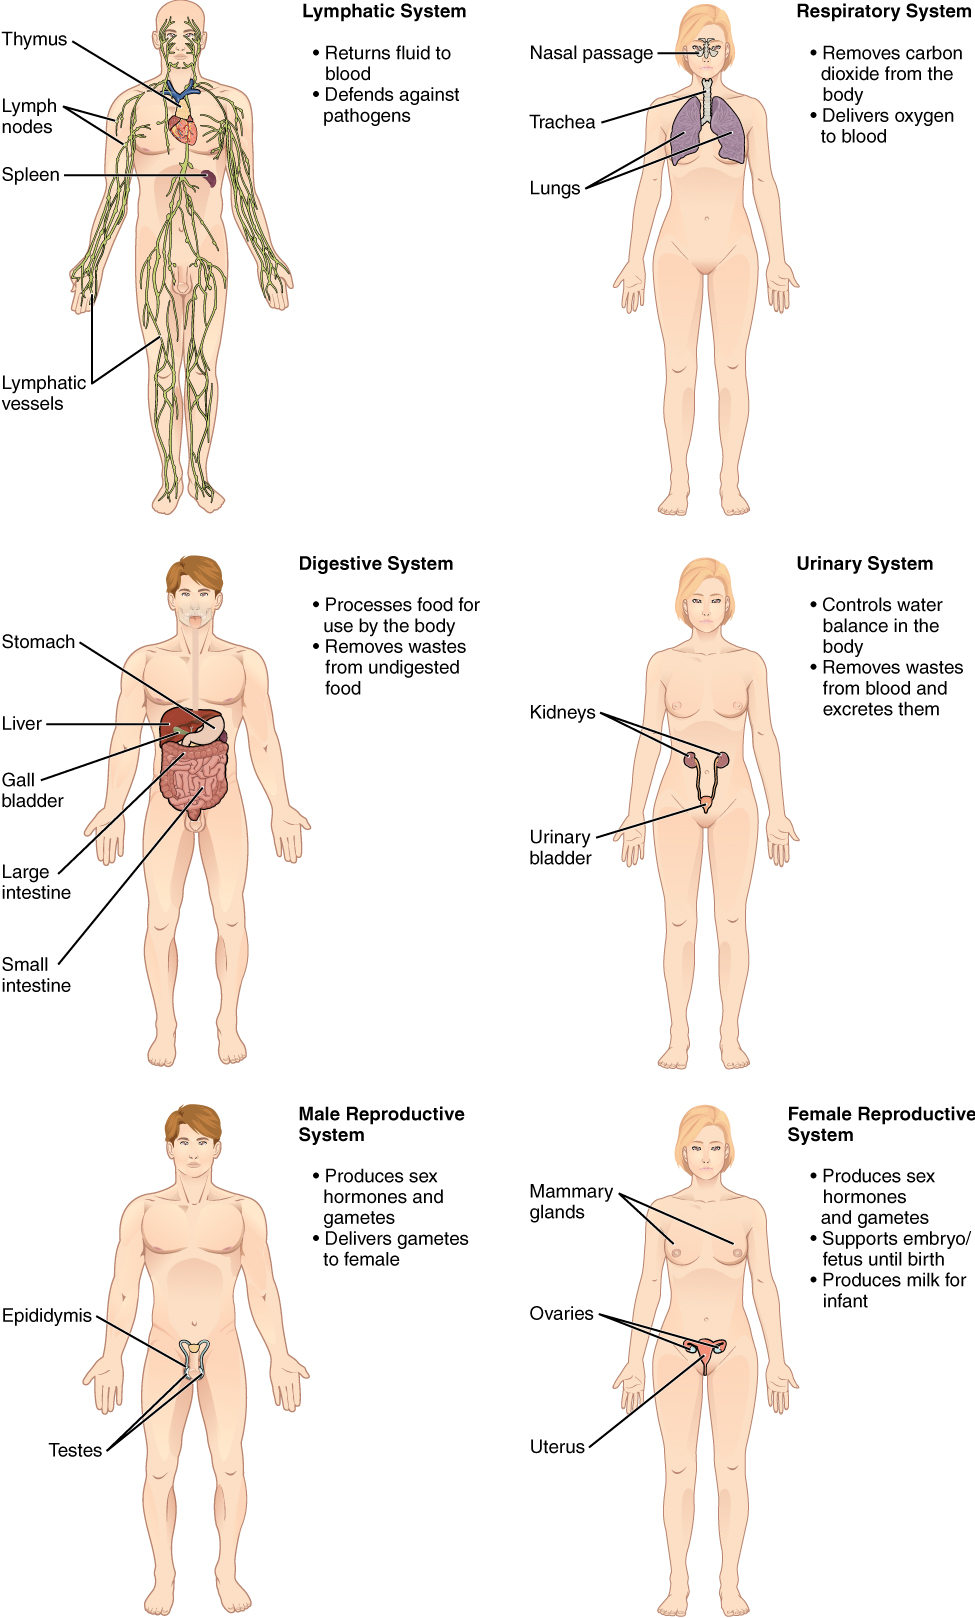 Diagram showing six of the organ systems in the human body. There is a separate diagram for each organ system. The lymphatic system, digestive system and male reproductive system are on the left, shown on male bodies. The respiratory system, urinary system and female reproductive system are on the right, shown on female bodies.